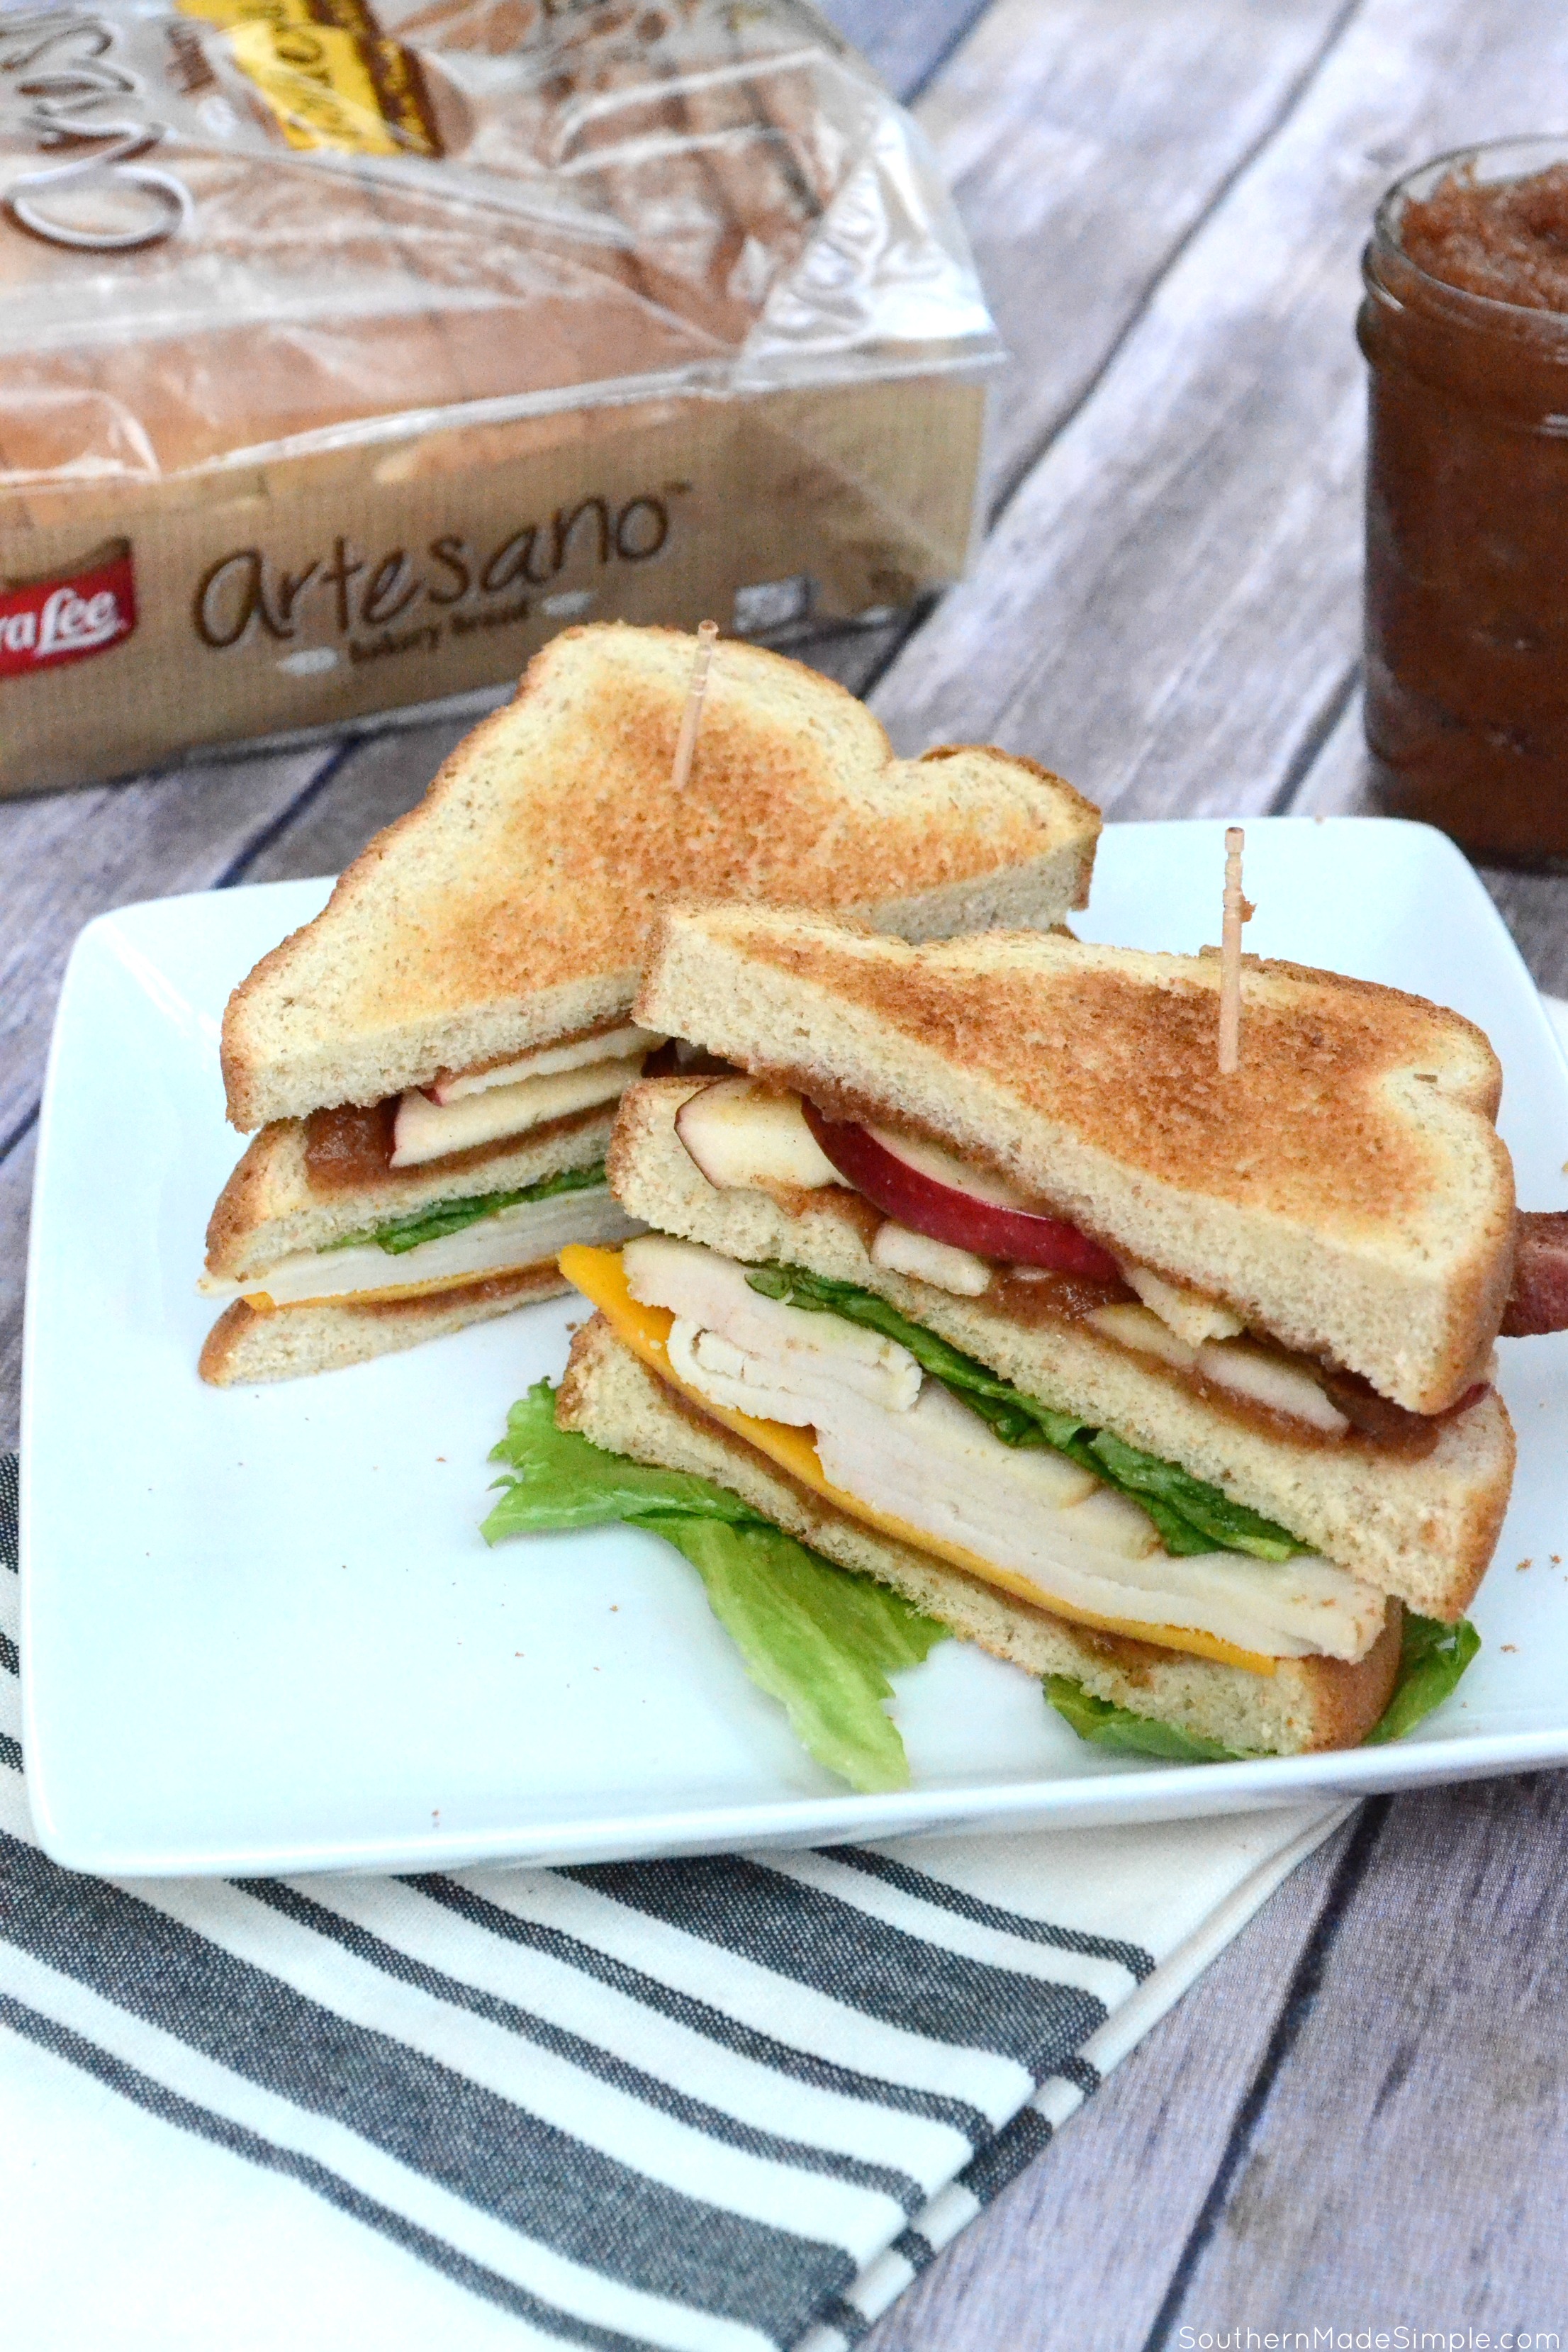 Forget what you know about turkey sandwiches. This Carved Turkey, Cheddar and Apple Butter Club Sandwich is stacked high with fresh apple slices, crispy bacon, thick carved turkey breast and the sweetest apple butter your mouth has ever tasted, and it's all nestled between three slices of Sara Lee Artesano Golden Wheat Bread! #ArtesanoGoldenWheat #Ad